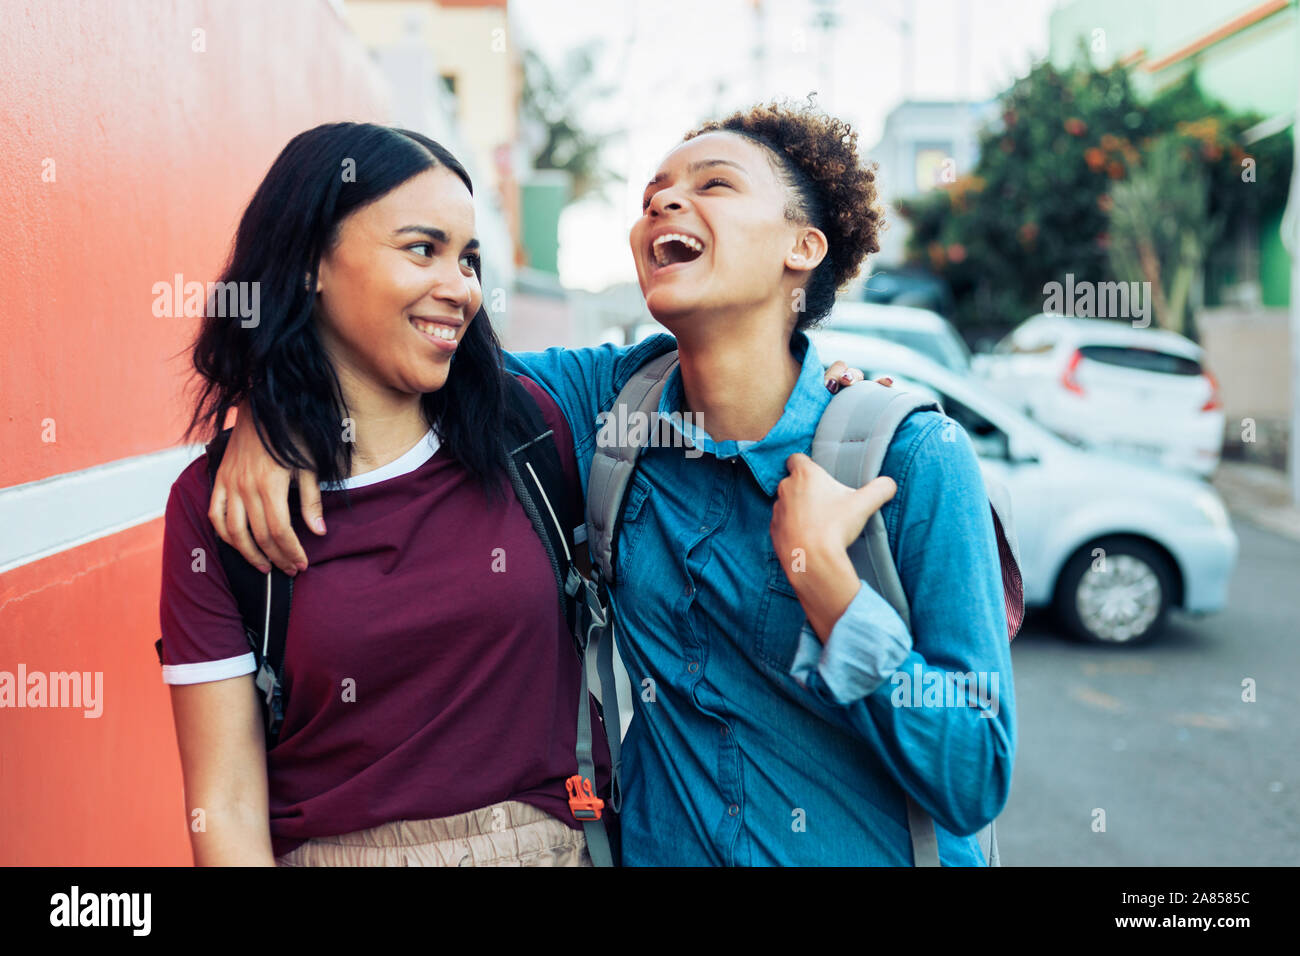 Happy, carefree young women friends Stock Photo